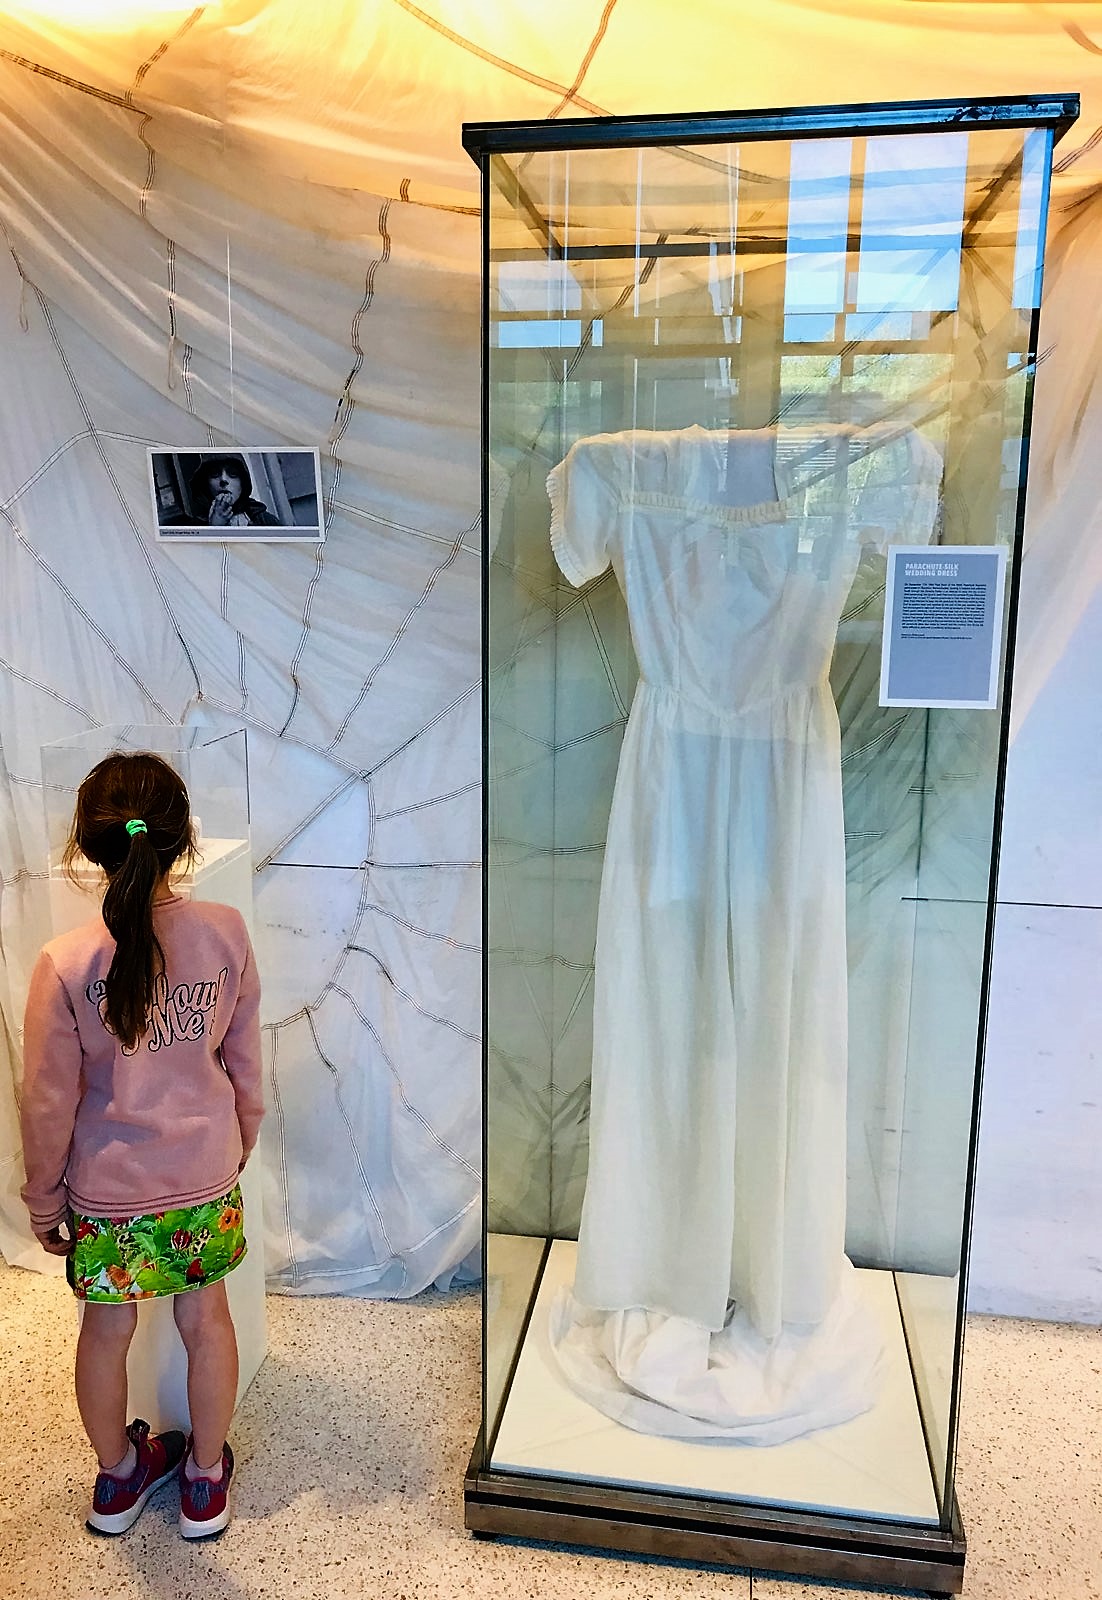 Color photograph, young girl looking at museum diplay text and white dress. A white parachute creates the backdrop.